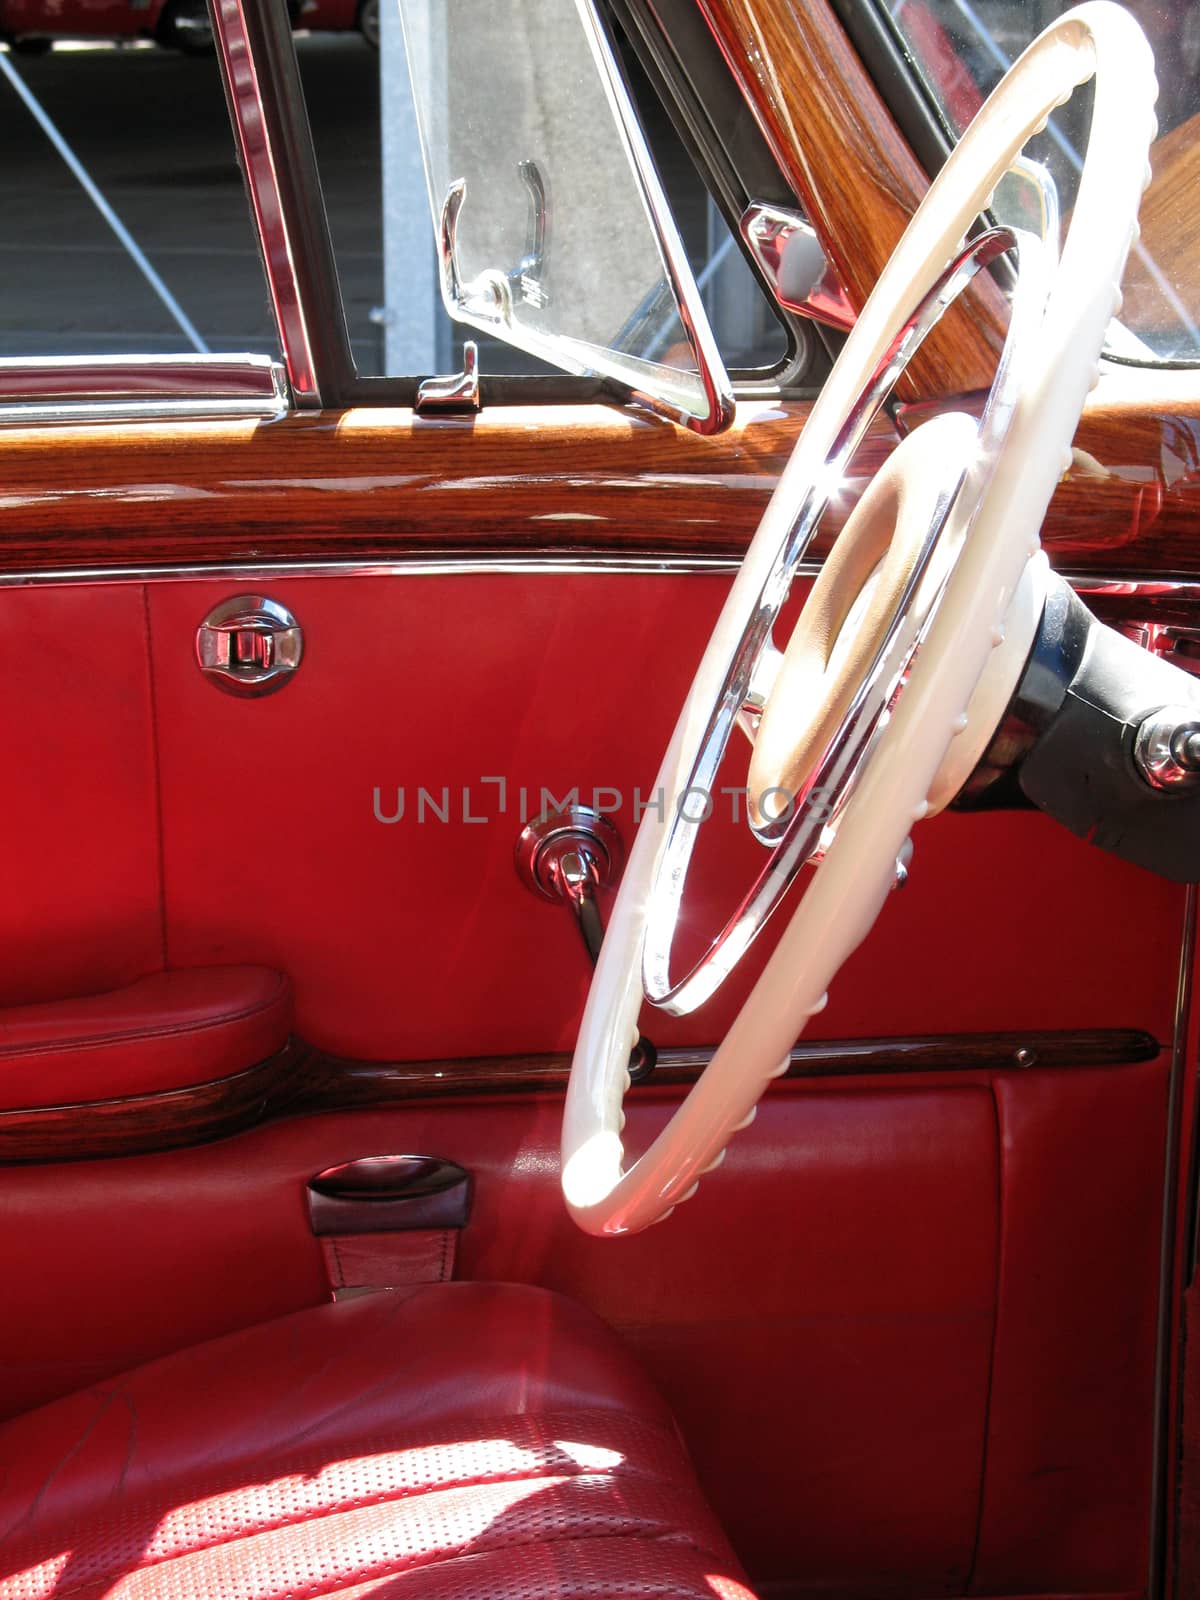 Antique car with red leather interior.